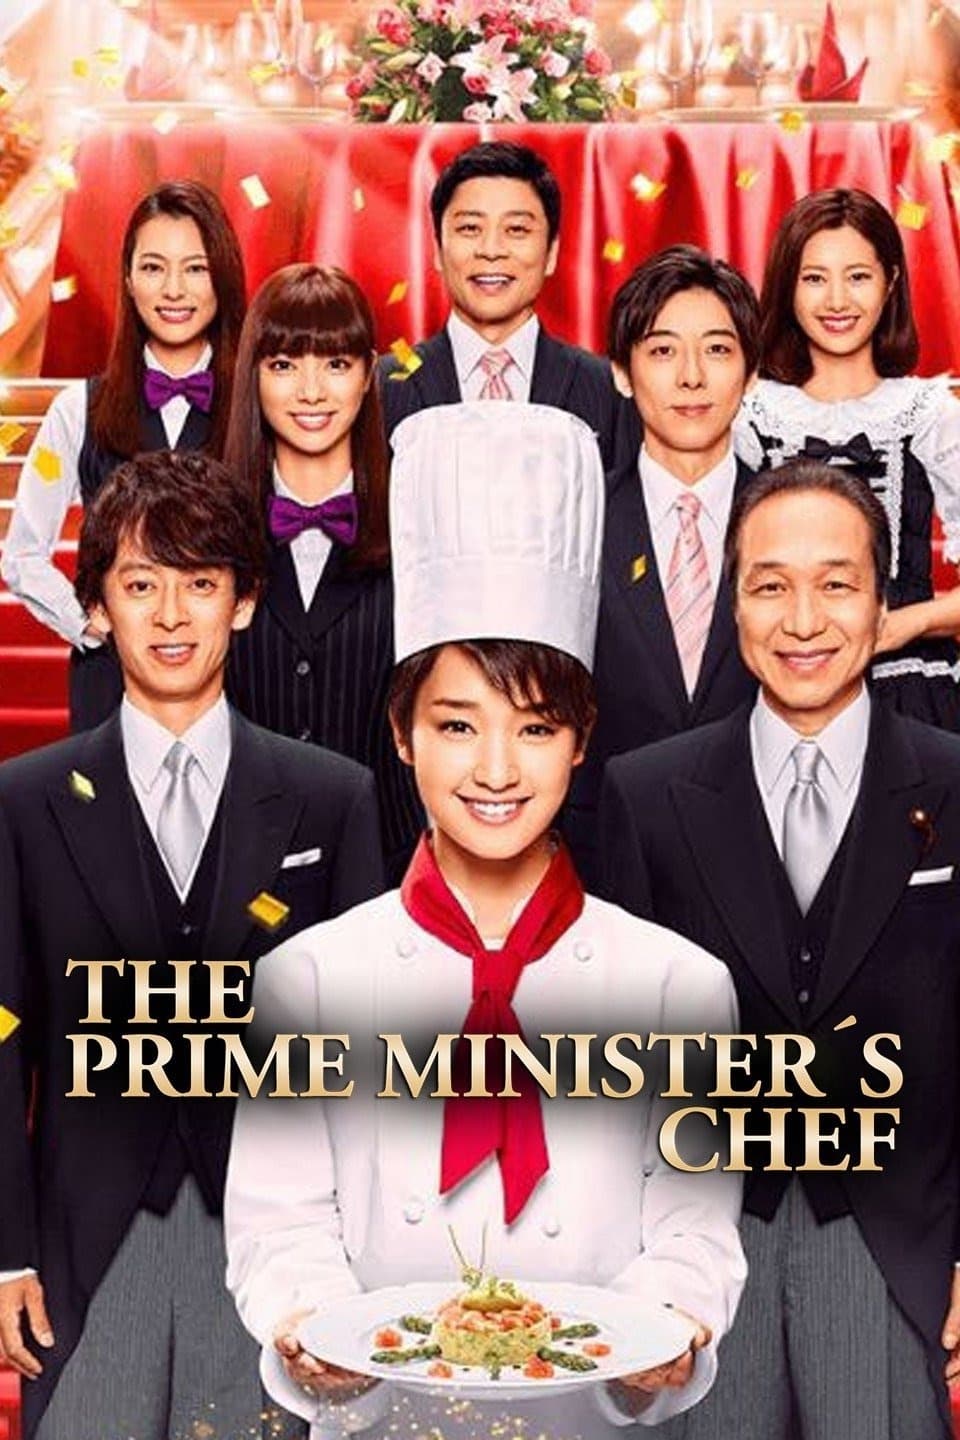 The Prime Minister's Chef